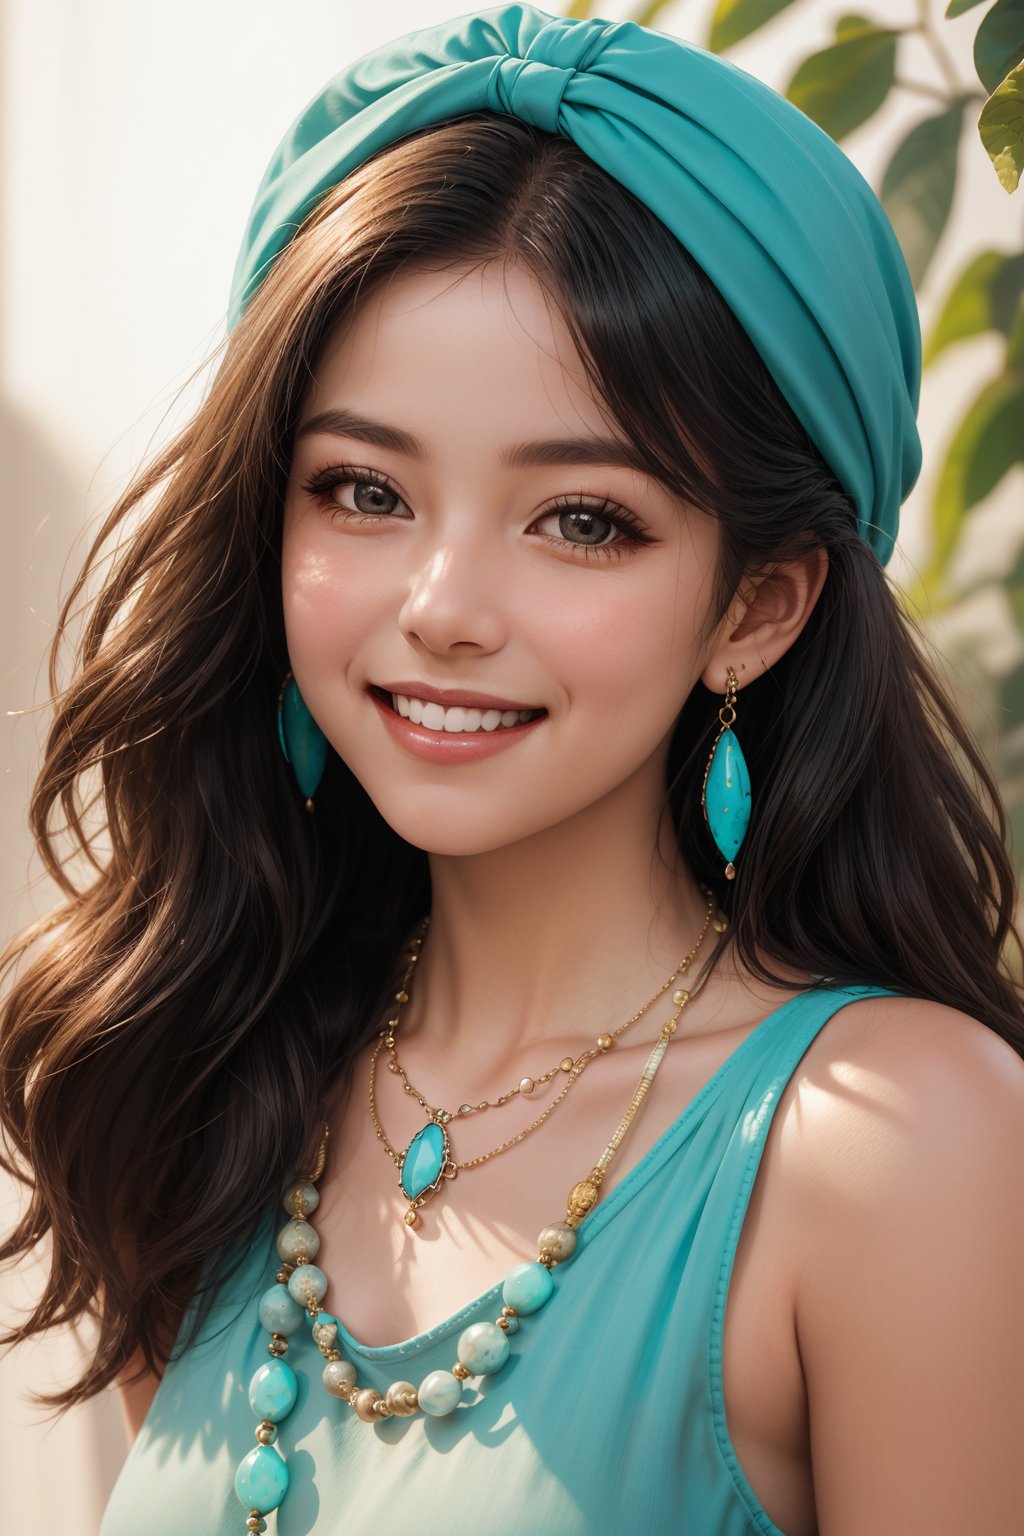 A close-up shot of a curious young girl's hands as she carefully slips a vibrant turquoise beaded necklace over her head. Soft, warm lighting illuminates the beads' iridescent sheen, with a shallow depth of field blurring the background. The girl's face is lit from above, highlighting her bright smile and sparkling eyes.